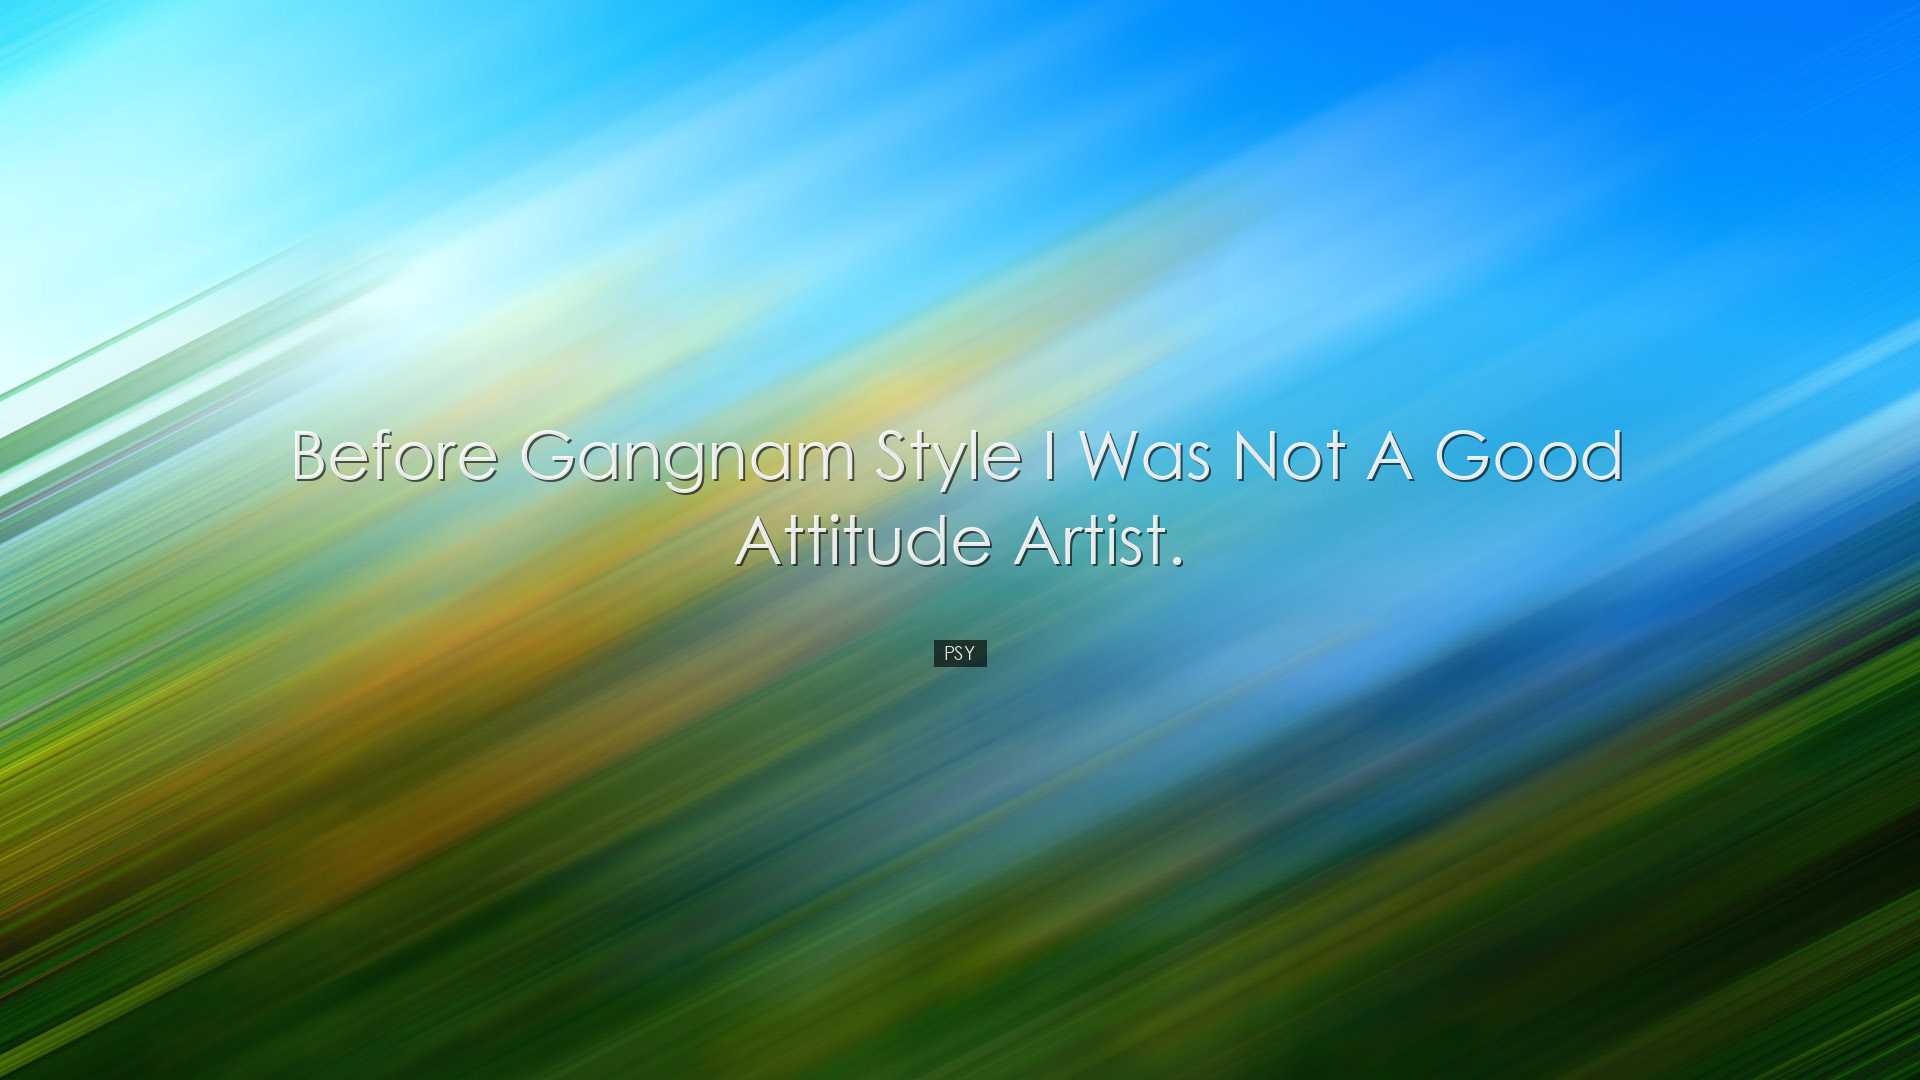 Before Gangnam Style I was not a good attitude artist. - PSY